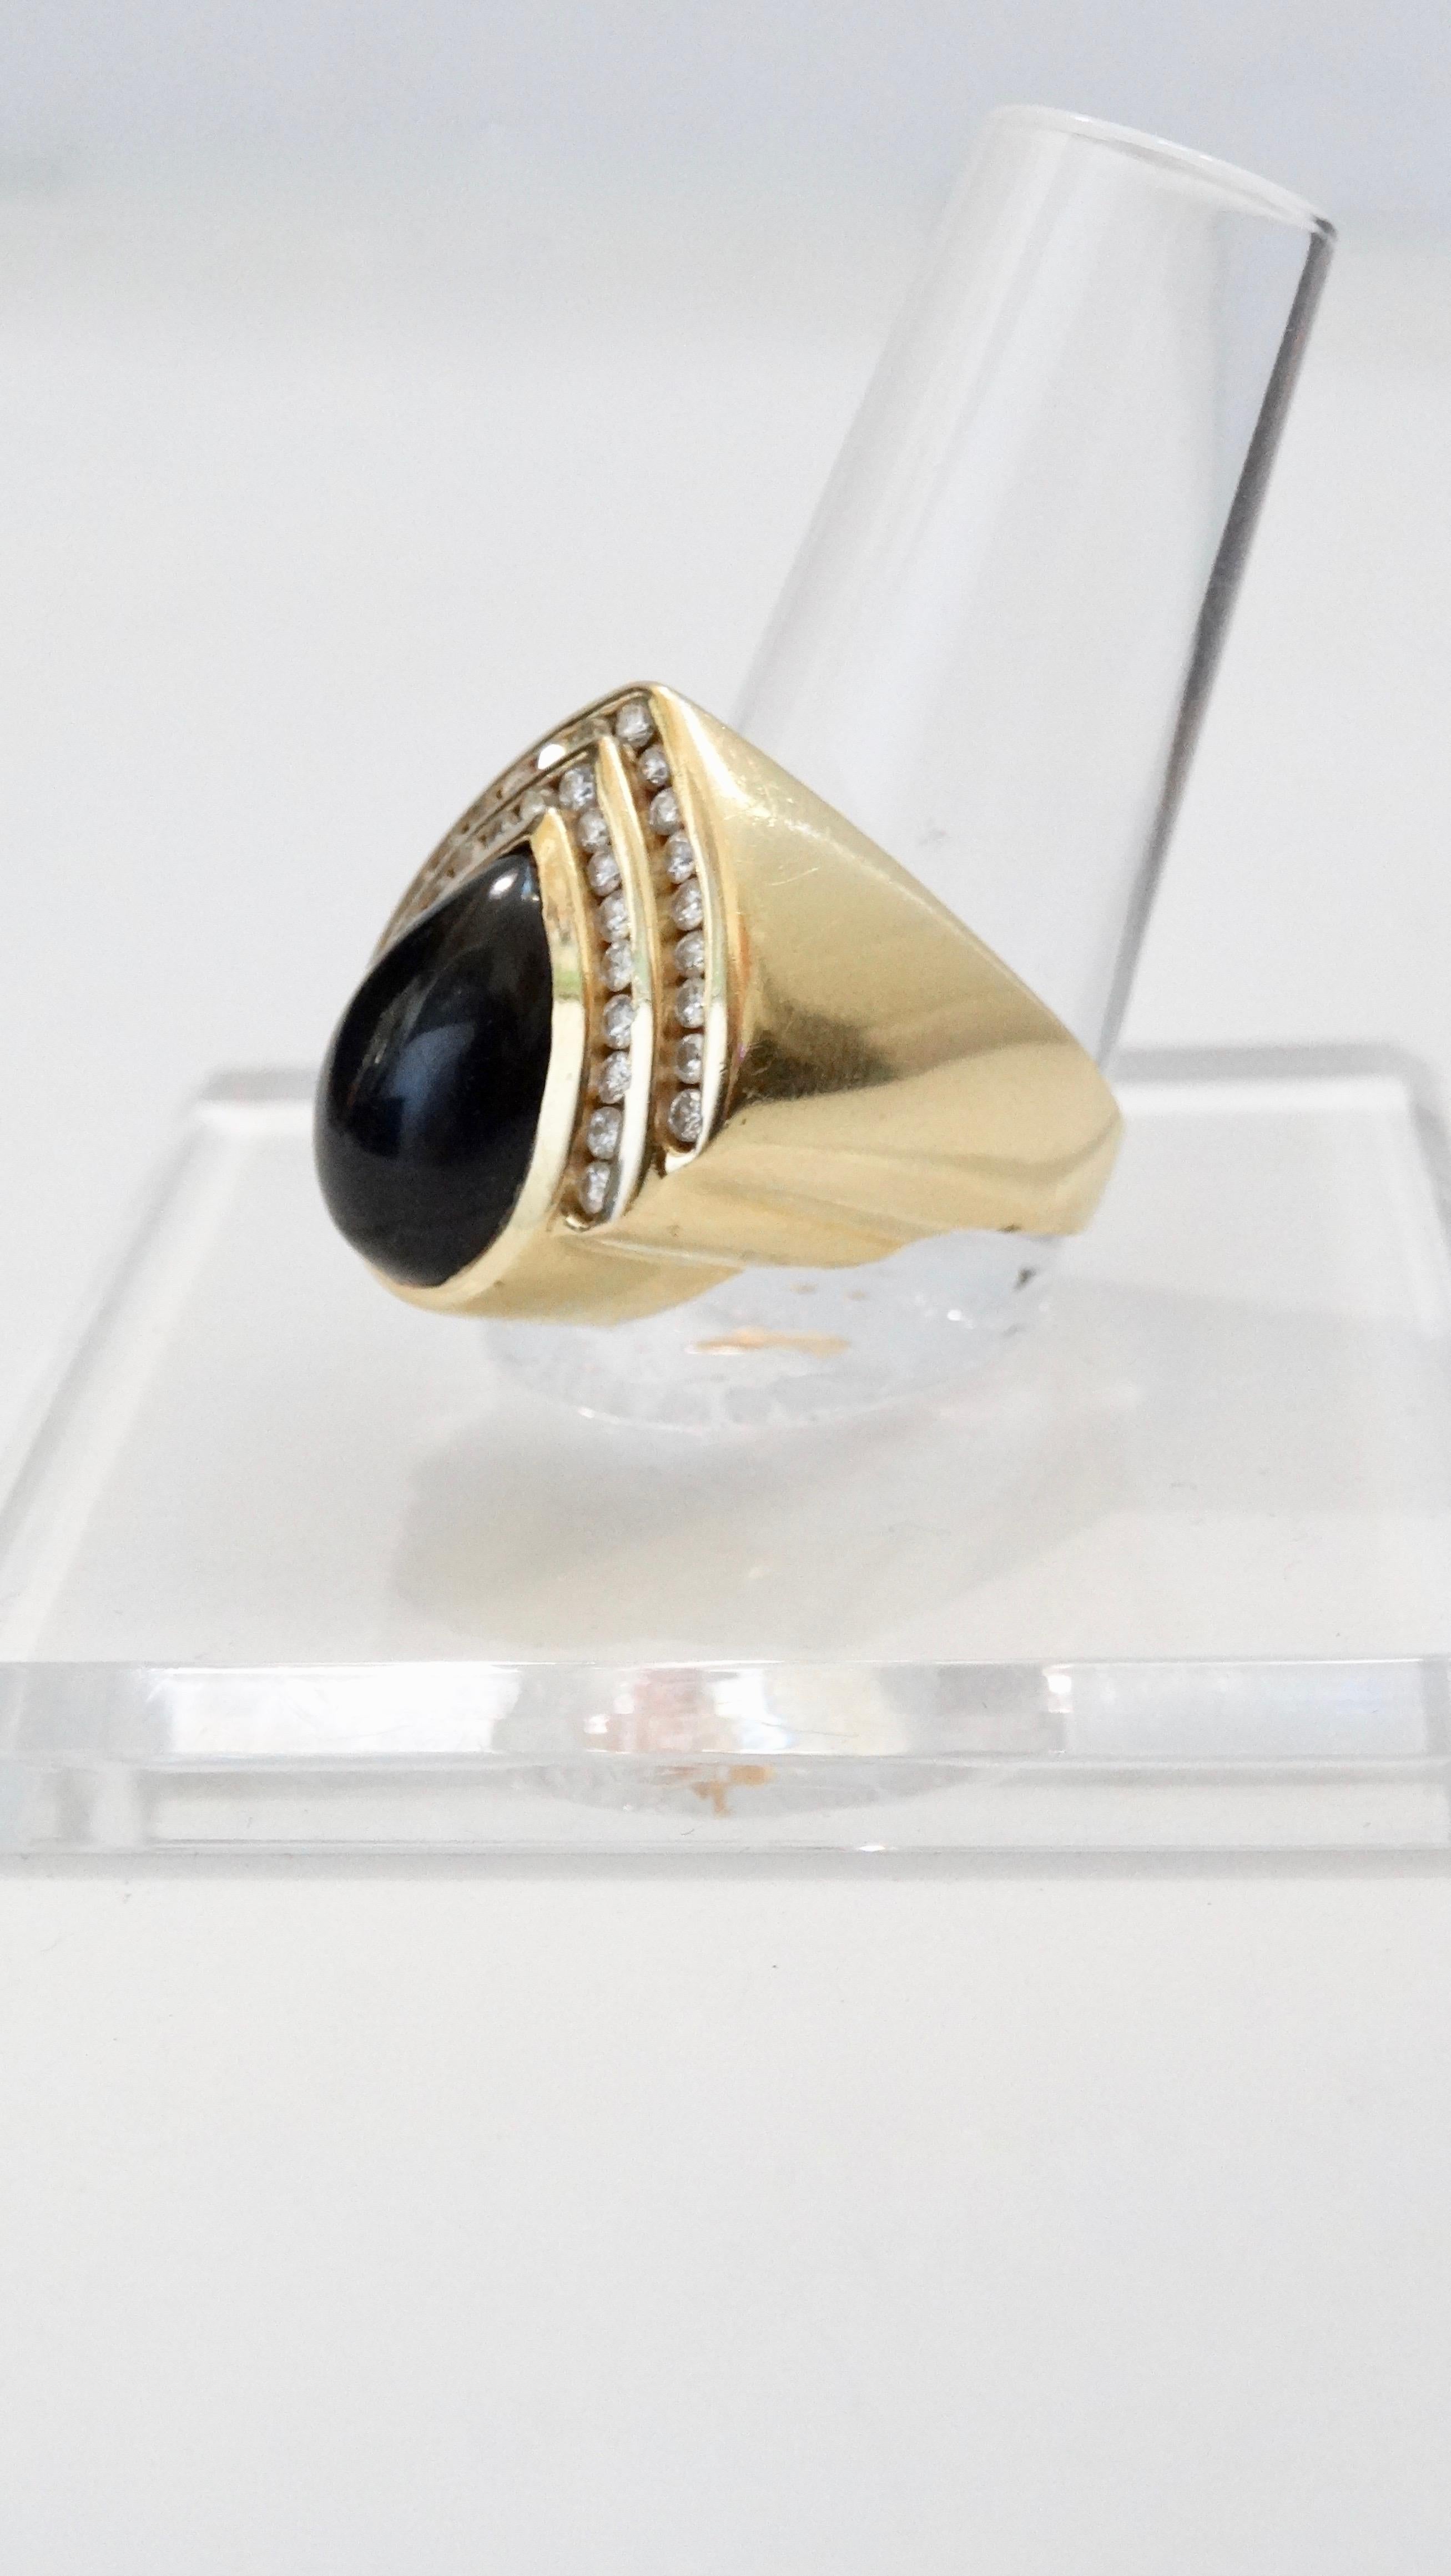 Gorgeous teardrop earring and ring set crafted from 14k Gold and set with an Onyx center stone and two rows of VS1 diamonds. Total weight in grams is 25.27 and ring is a size 7.5. Earrings feature pierced back with a lever closure. Classic and